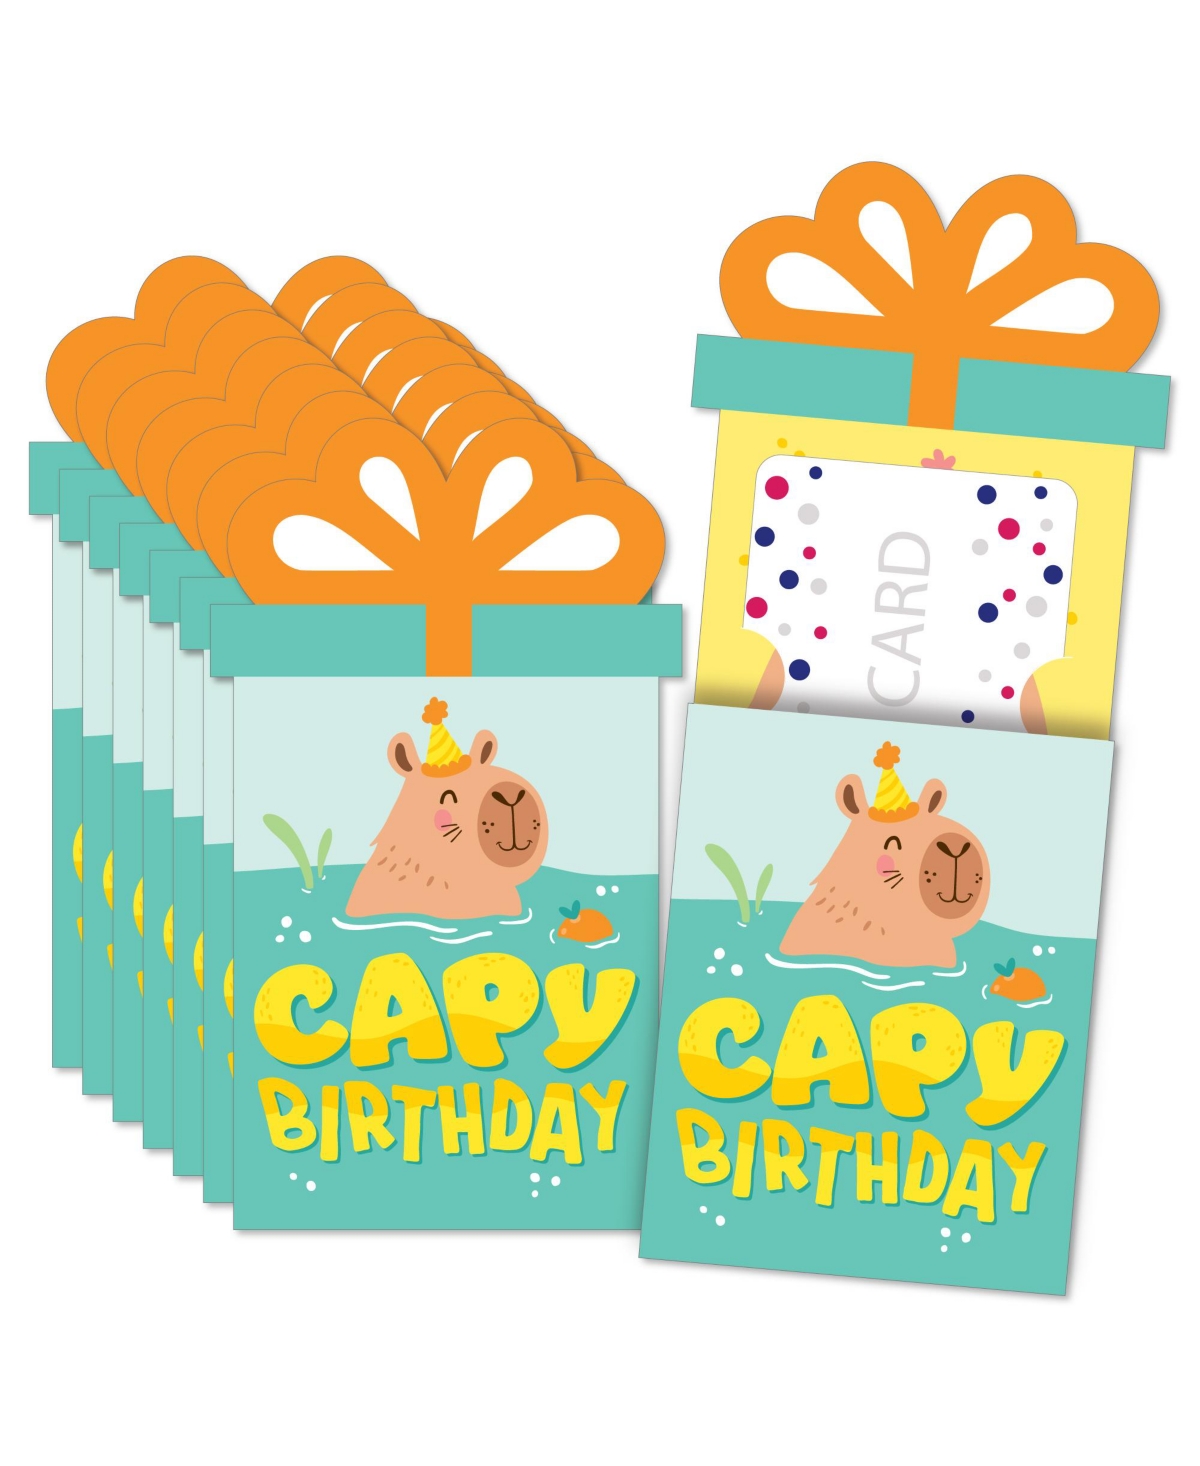 Capy Birthday Capybara Money & Gift Card Sleeves - Nifty Gifty Card Holders 8 Ct - Assorted Pre-pack (See Table